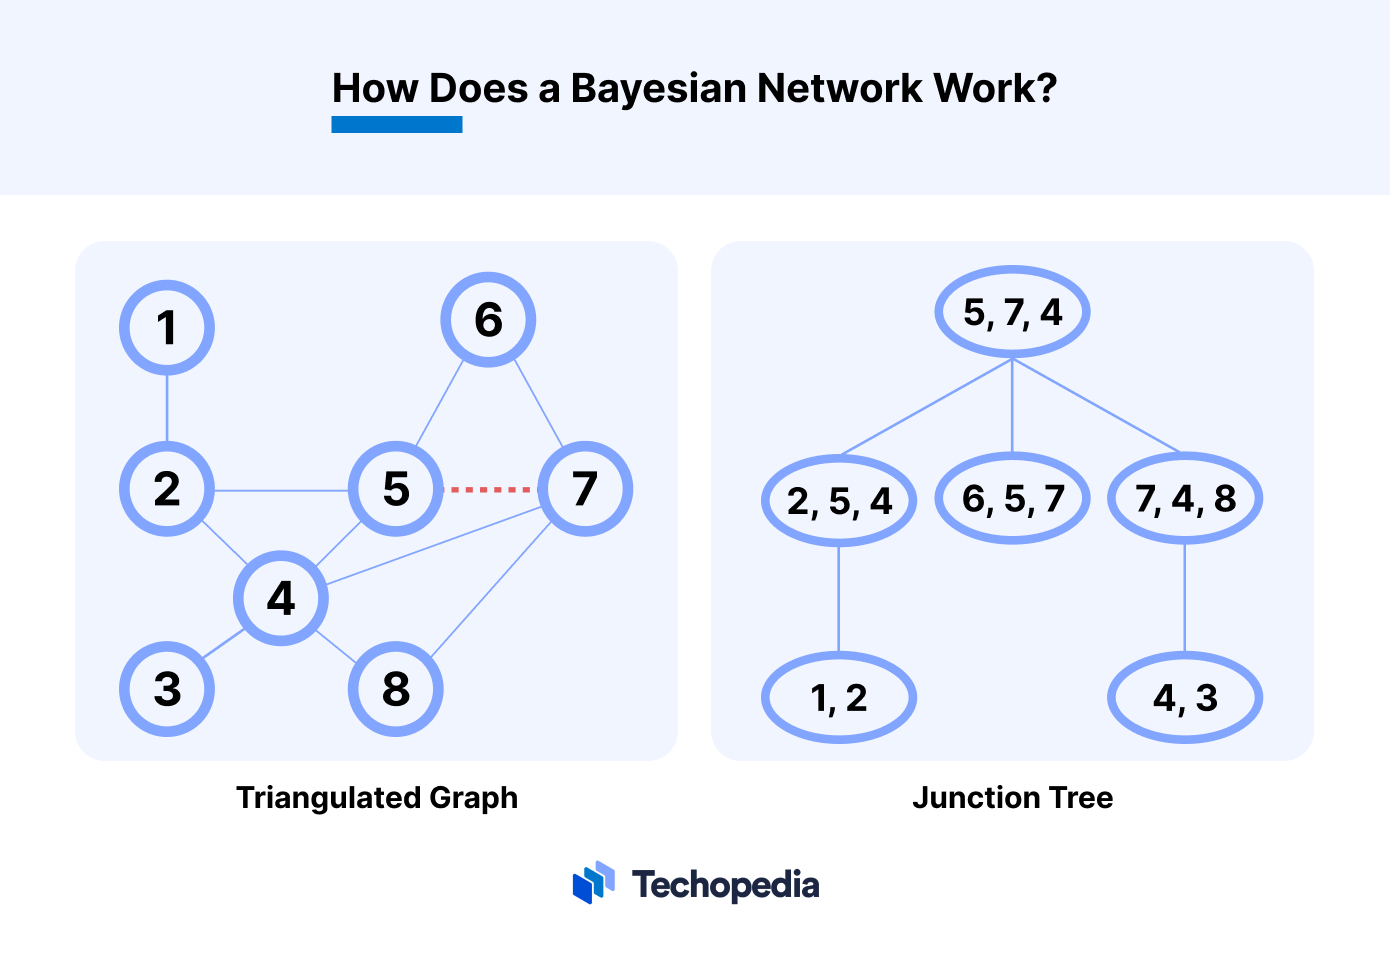 How Does a Bayesian Network Work?